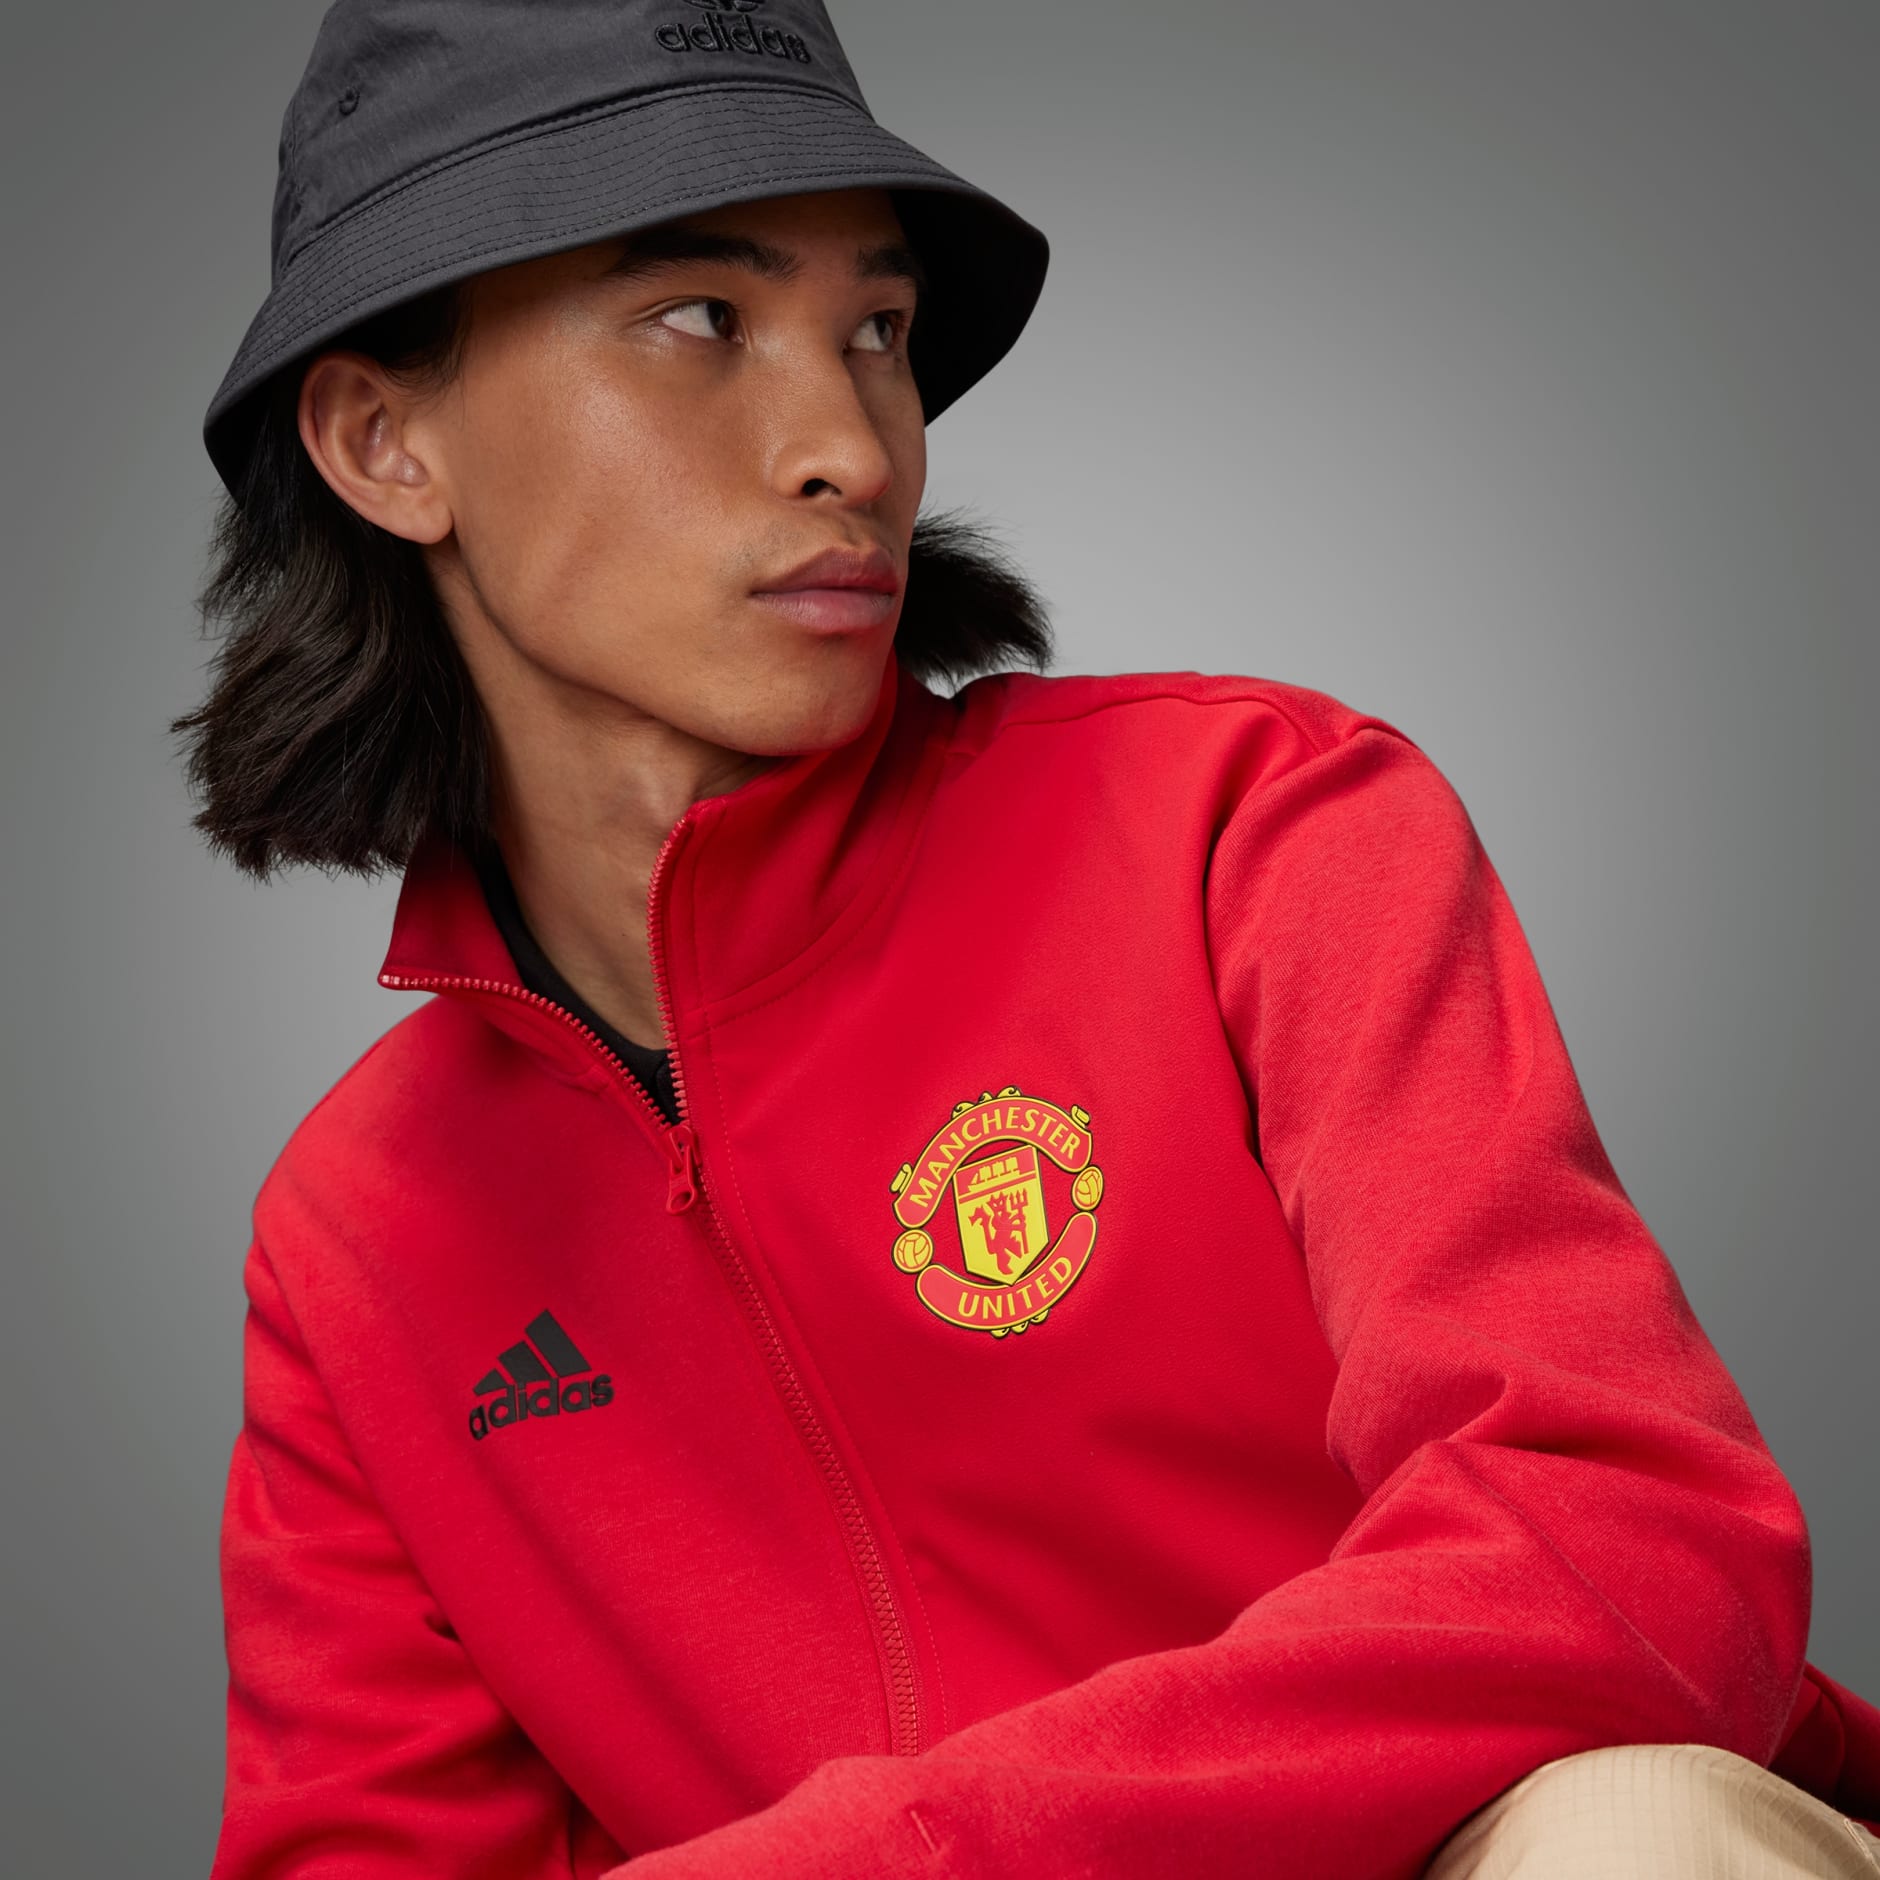 Clothing - Manchester United Anthem Jacket - Red | adidas South Africa